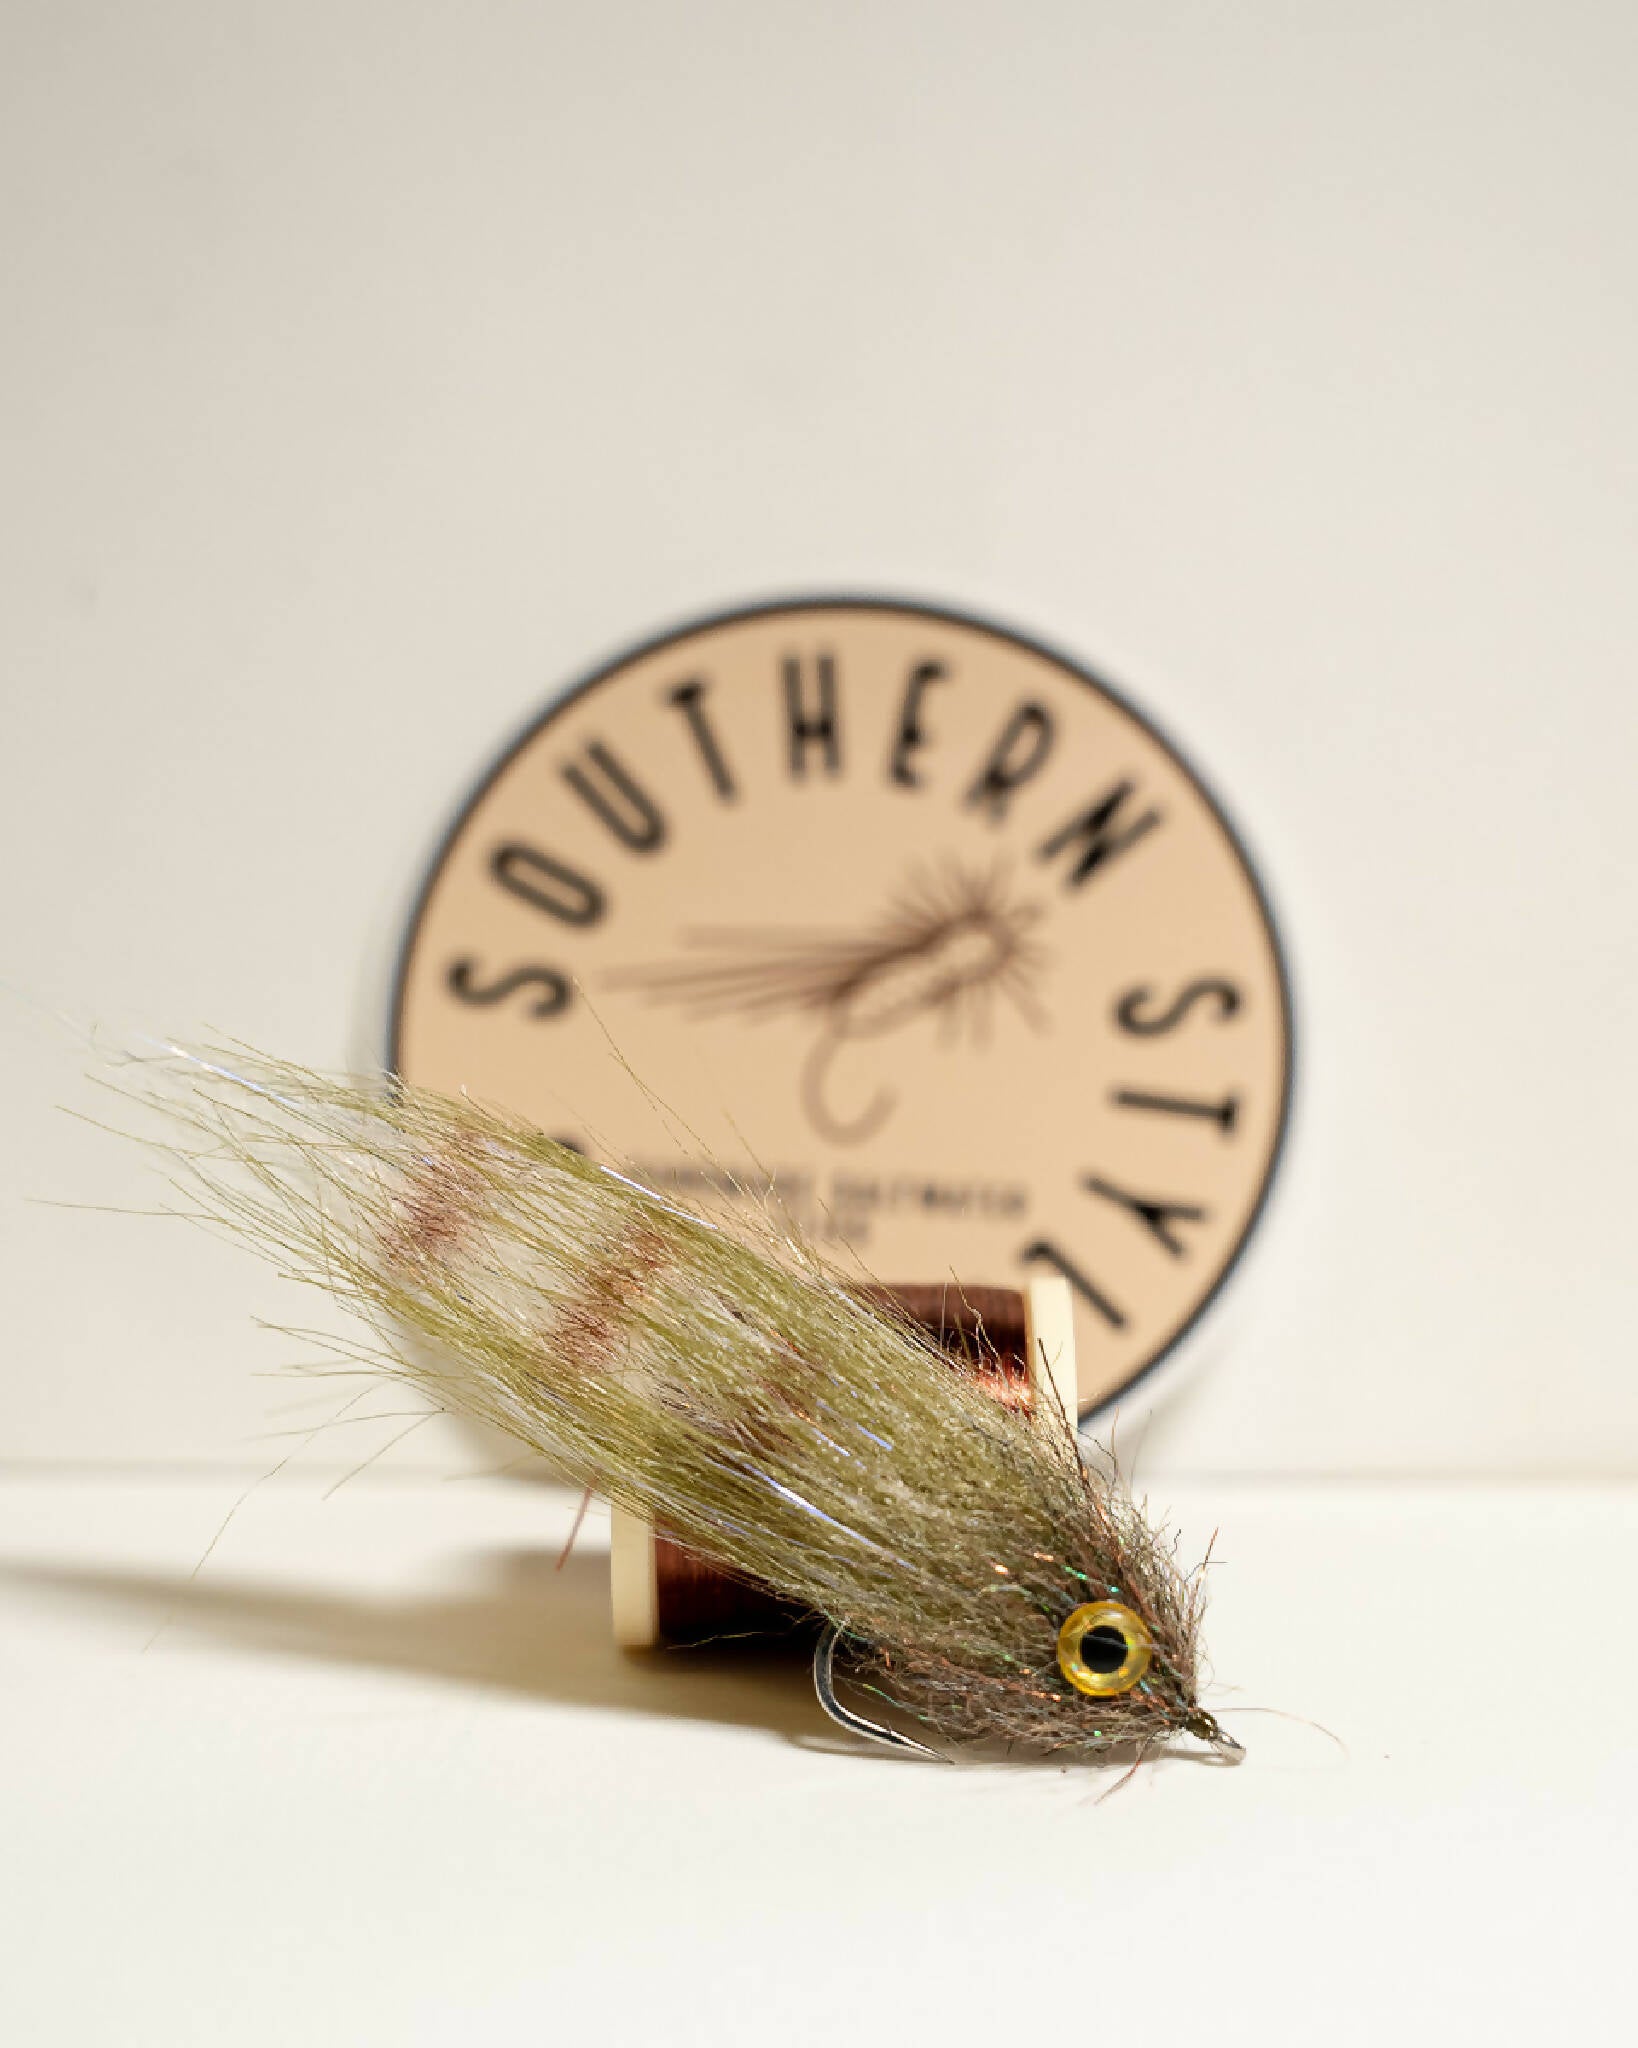 Super Mullet 3 Pack – Check Your Flies